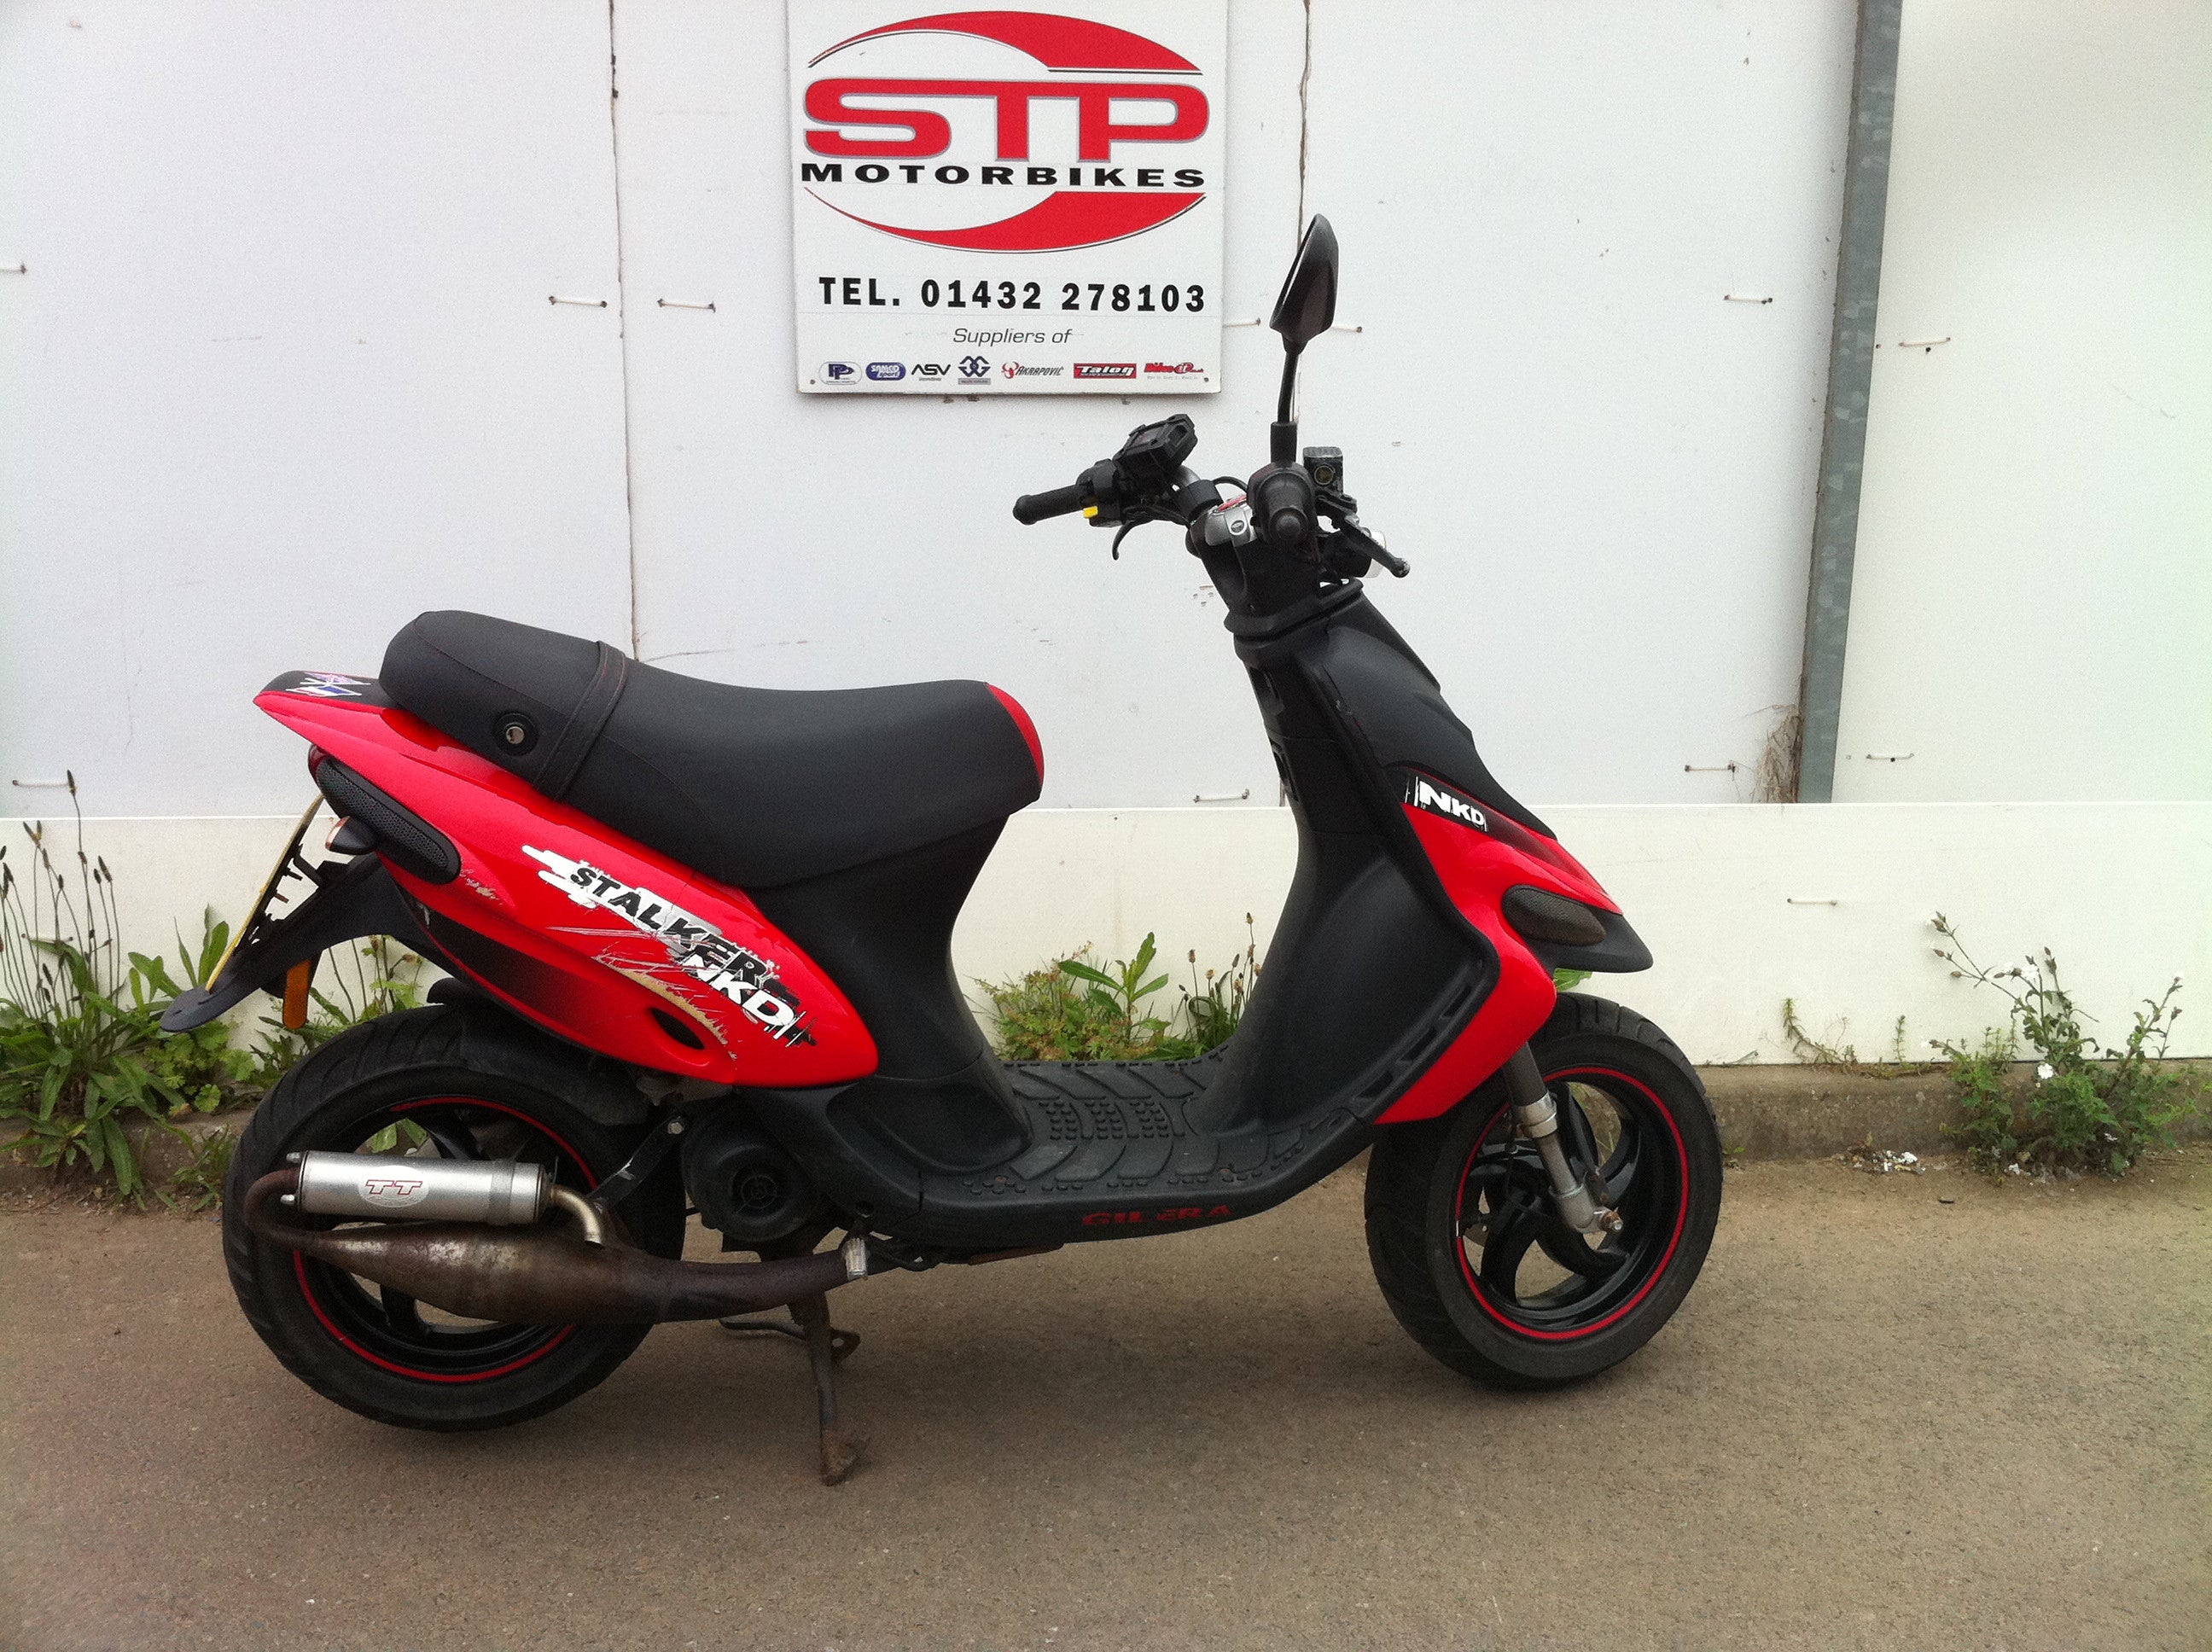 2008 Gilera Naked 50cc 2-stroke Scooter Moped 6387km | STP Products